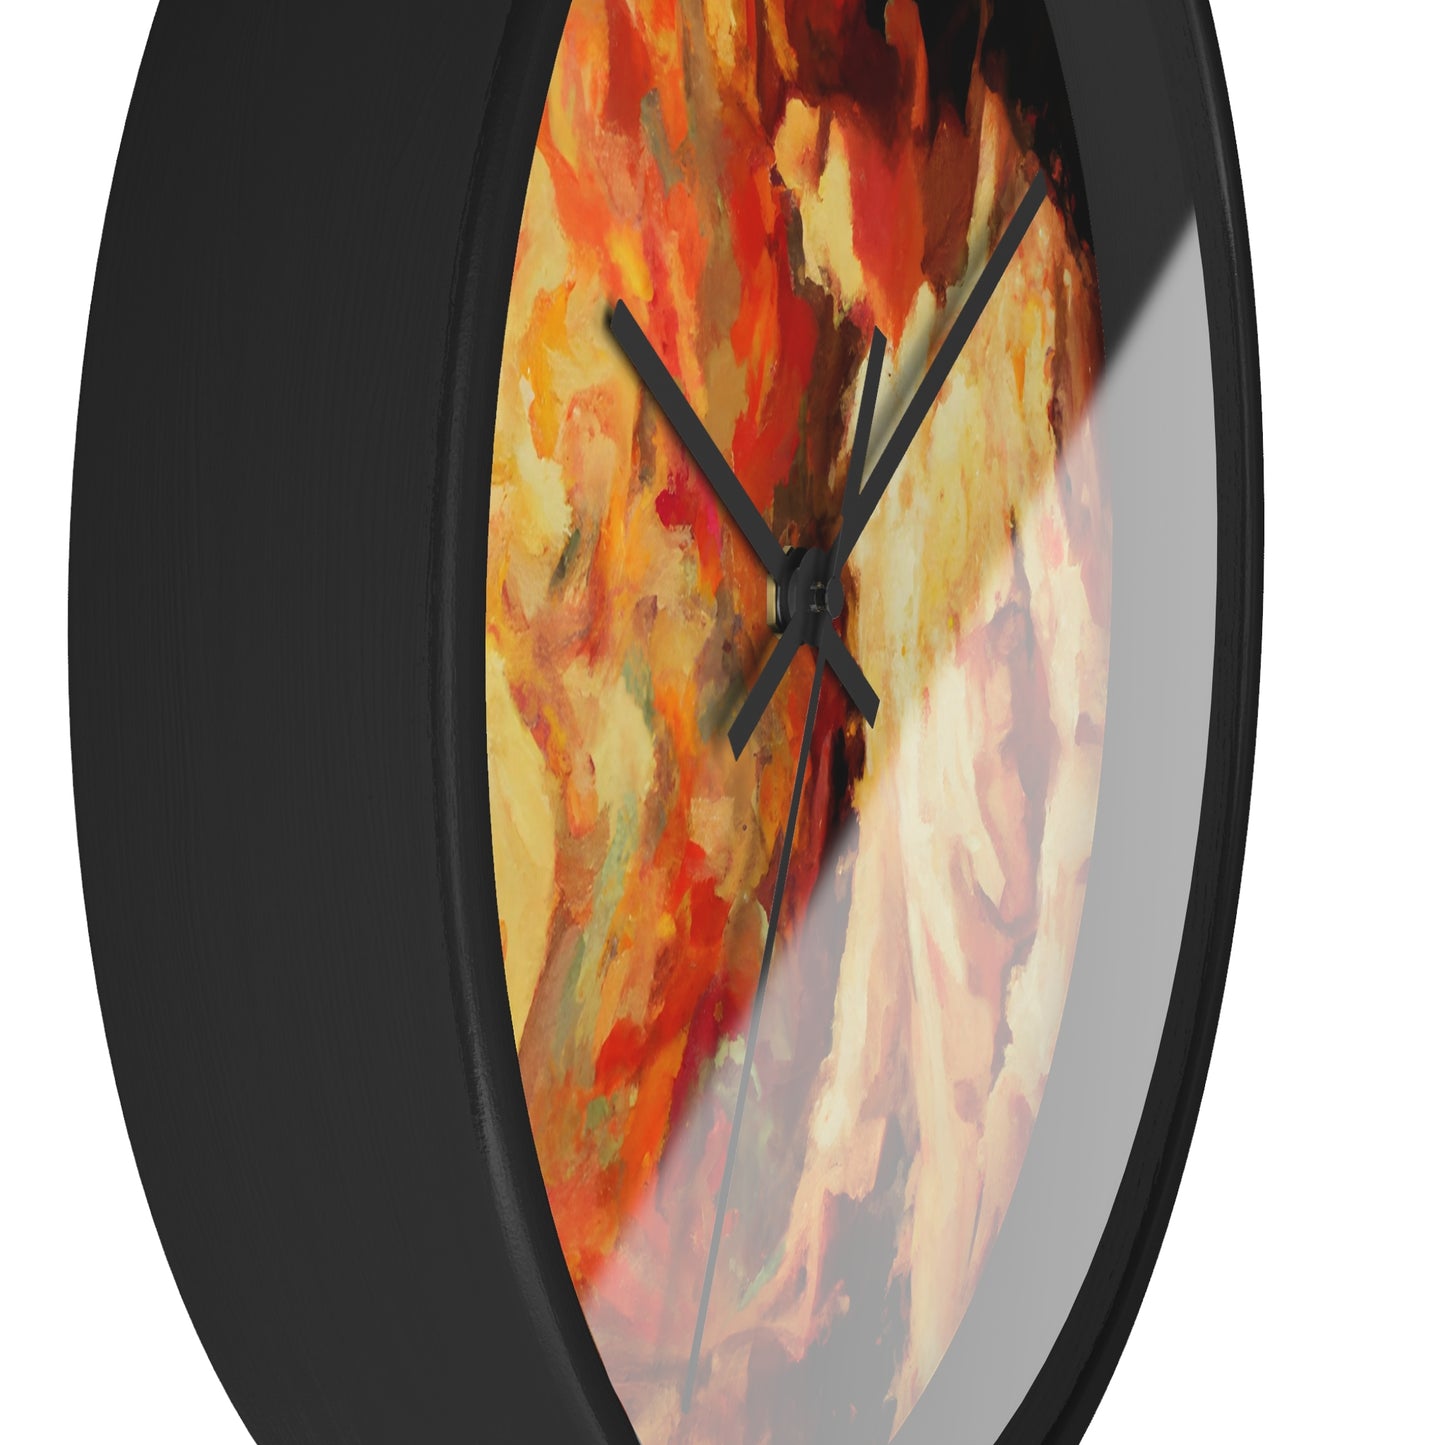 Eon Artiste - Autism-Inspired Wall Clock